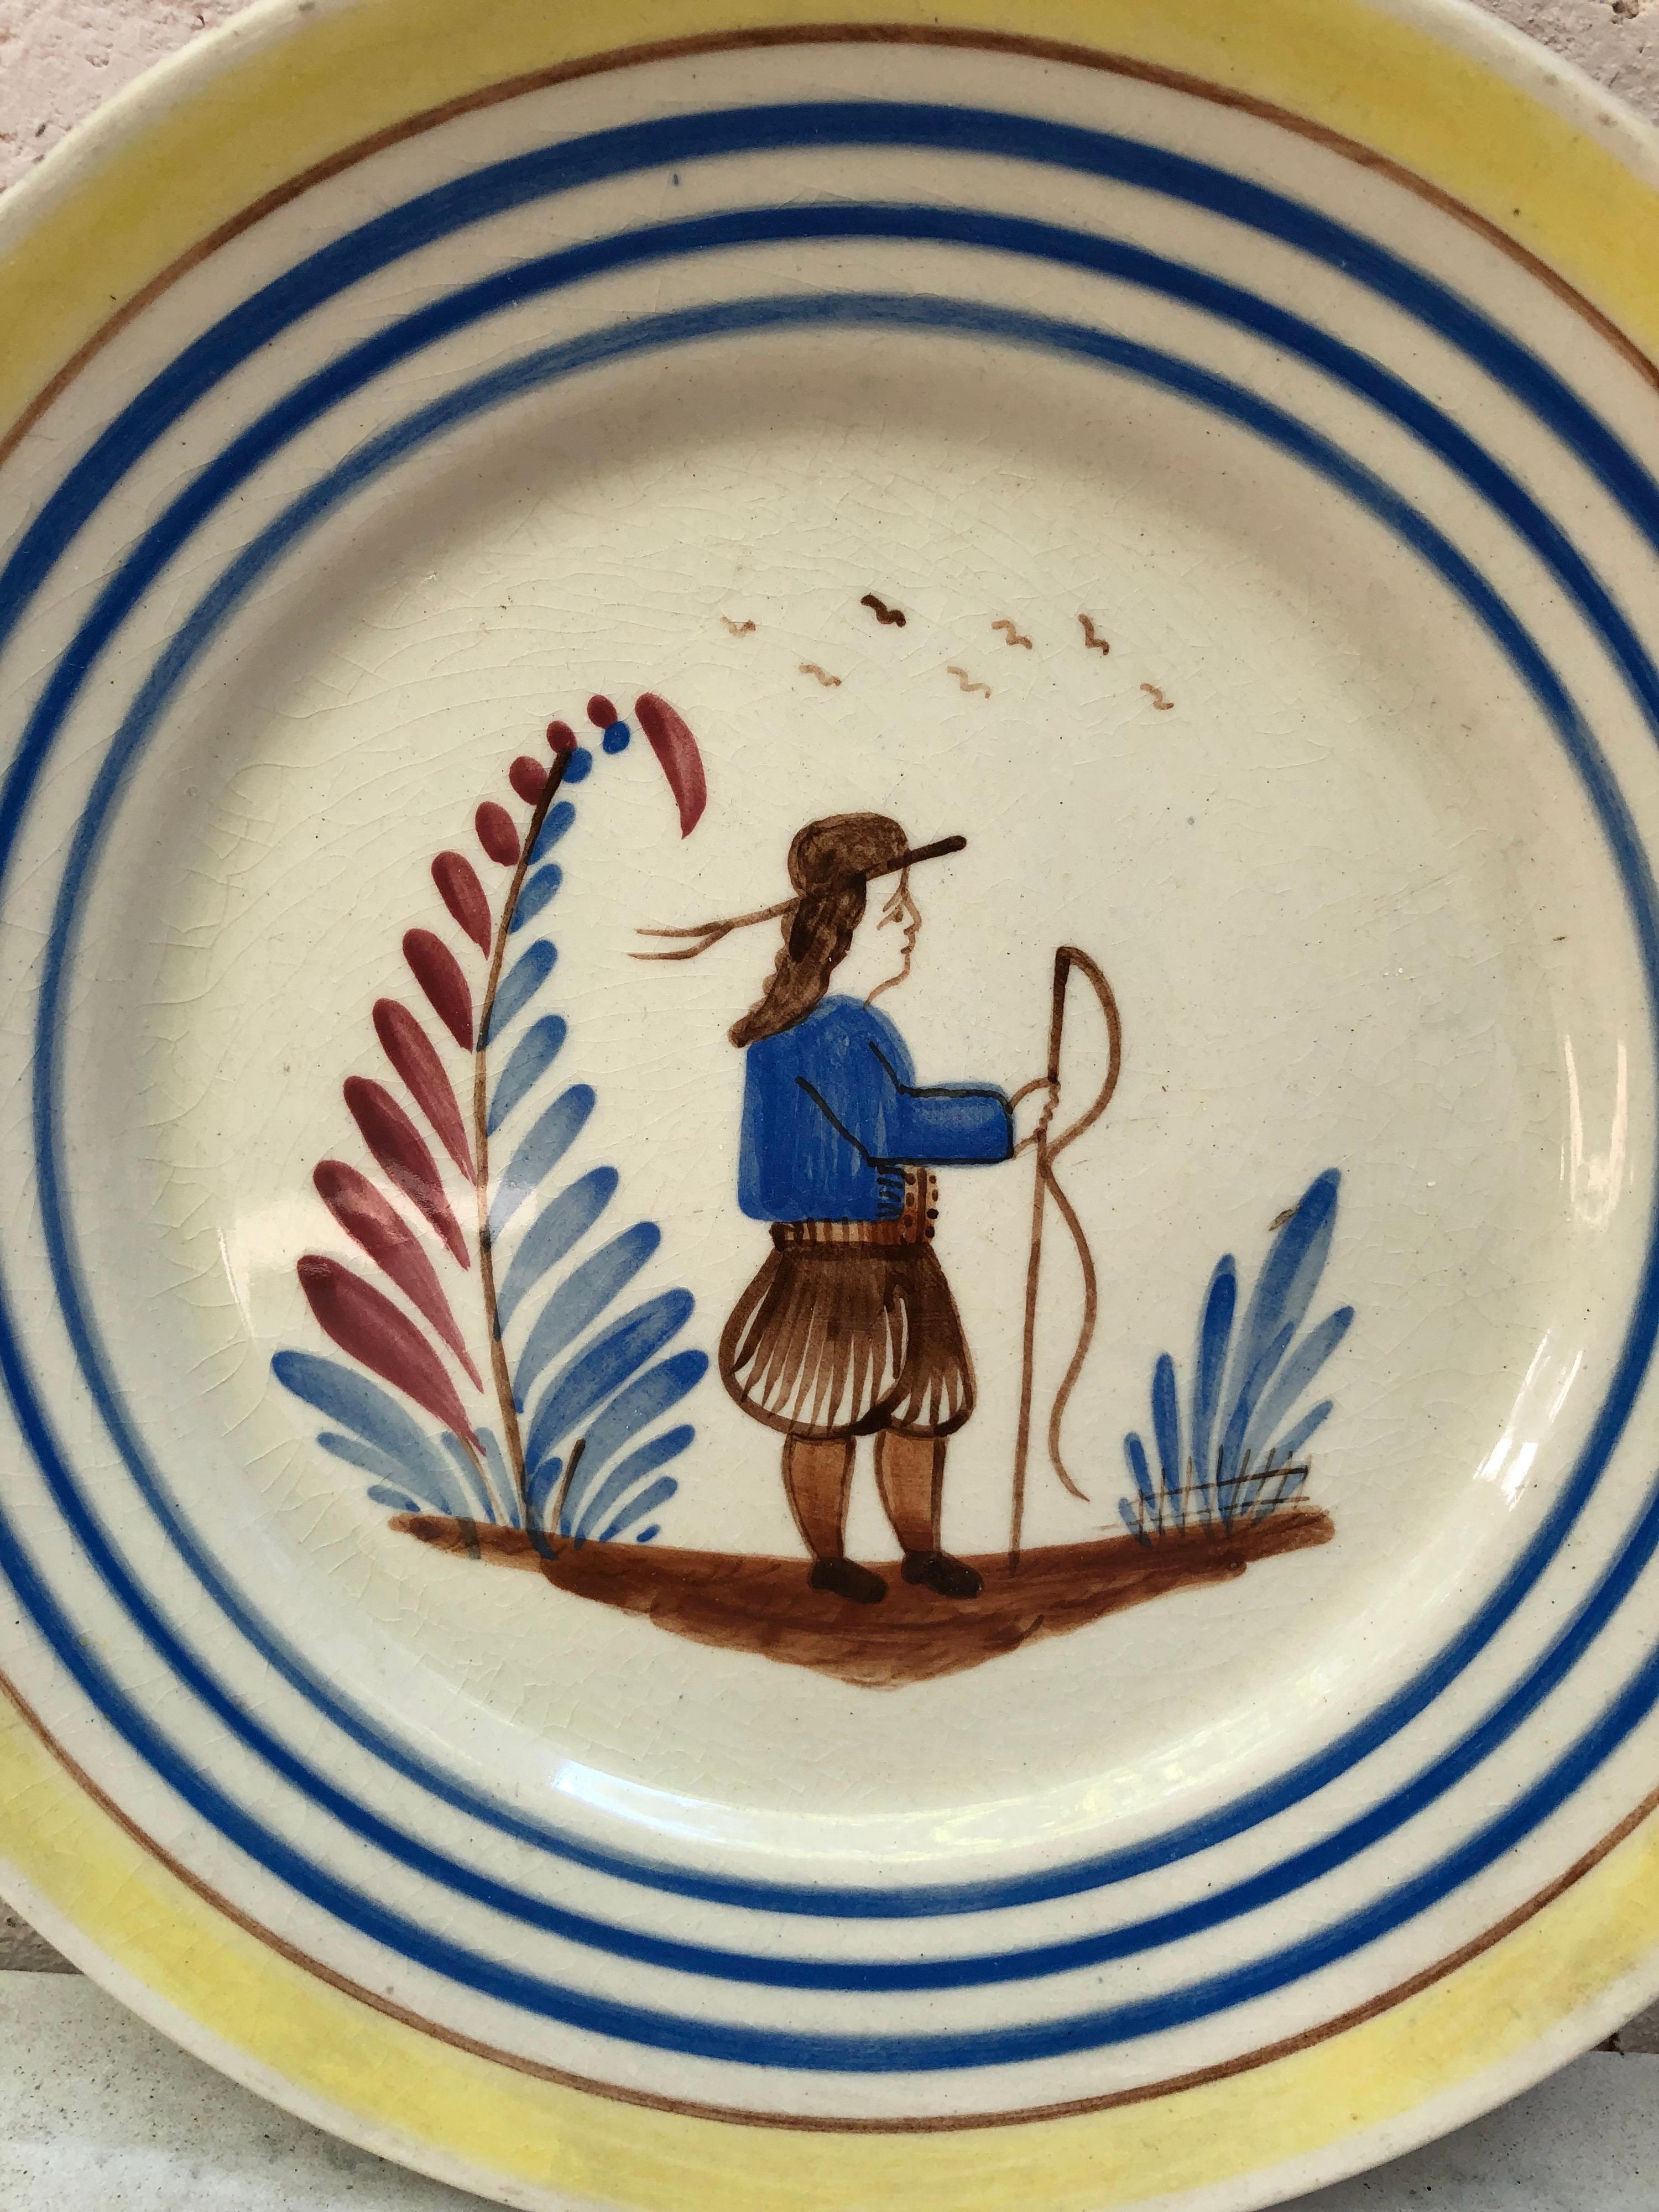 A French large faience plate with a farmer in the costume with flowers signed Henriot Quimper, circa 1950.
Colorful yellow border and blue lines.
Measure: 9.5 diameter.